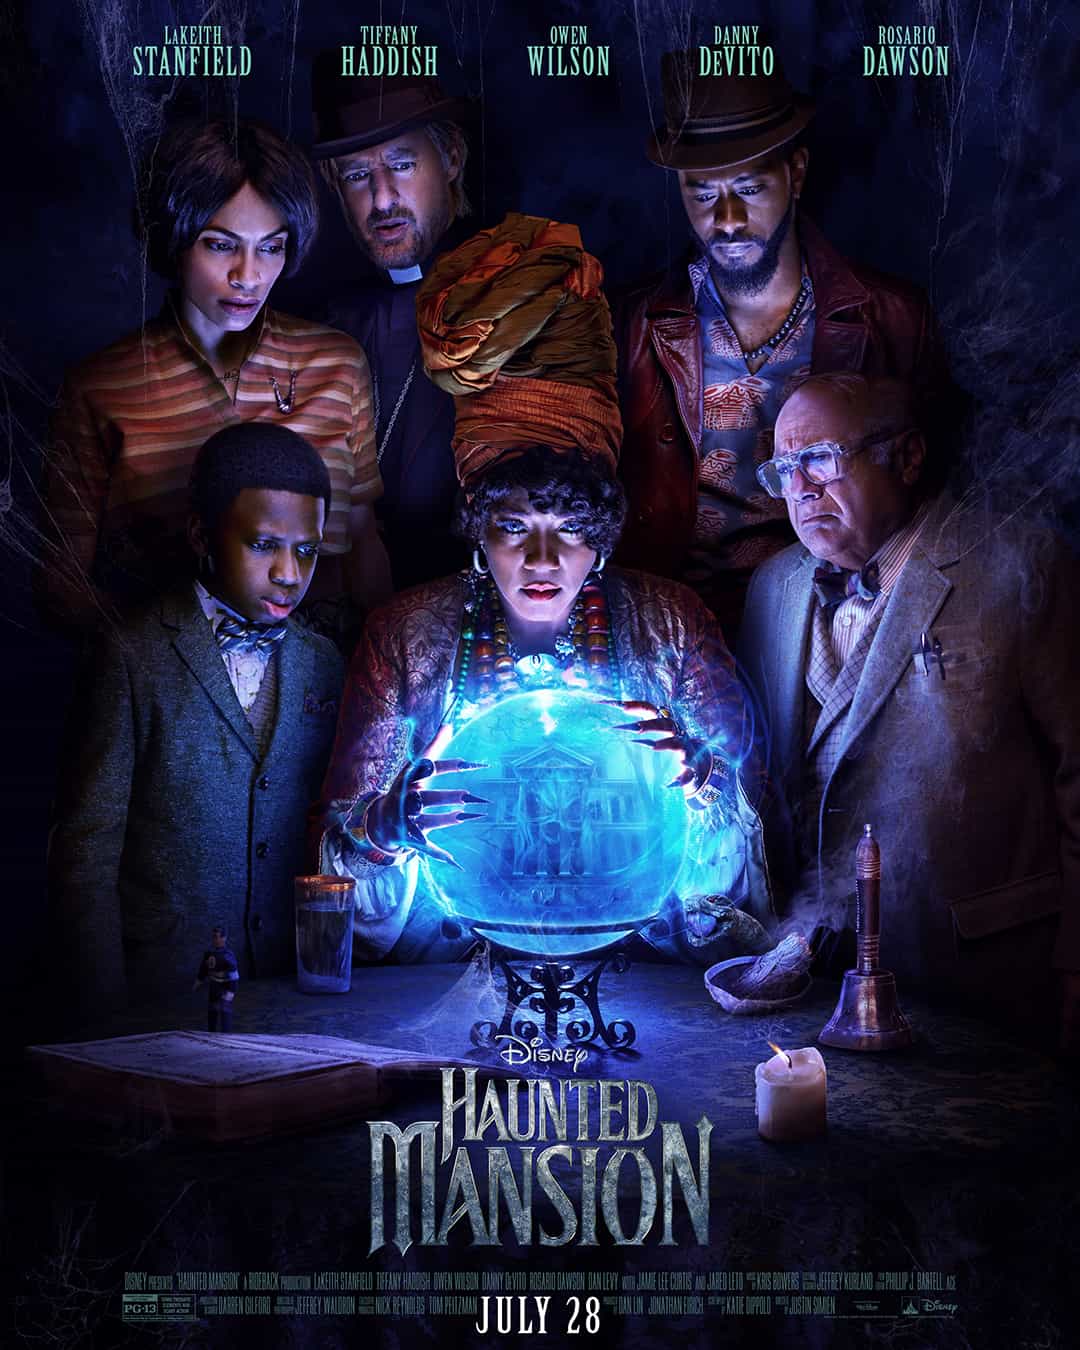 Check out the new trailer for upcoming movie Haunted Mansion which stars Rosario Dawson and Owen Wilson - movie UK release date 11th August 2023 #hauntedmansion